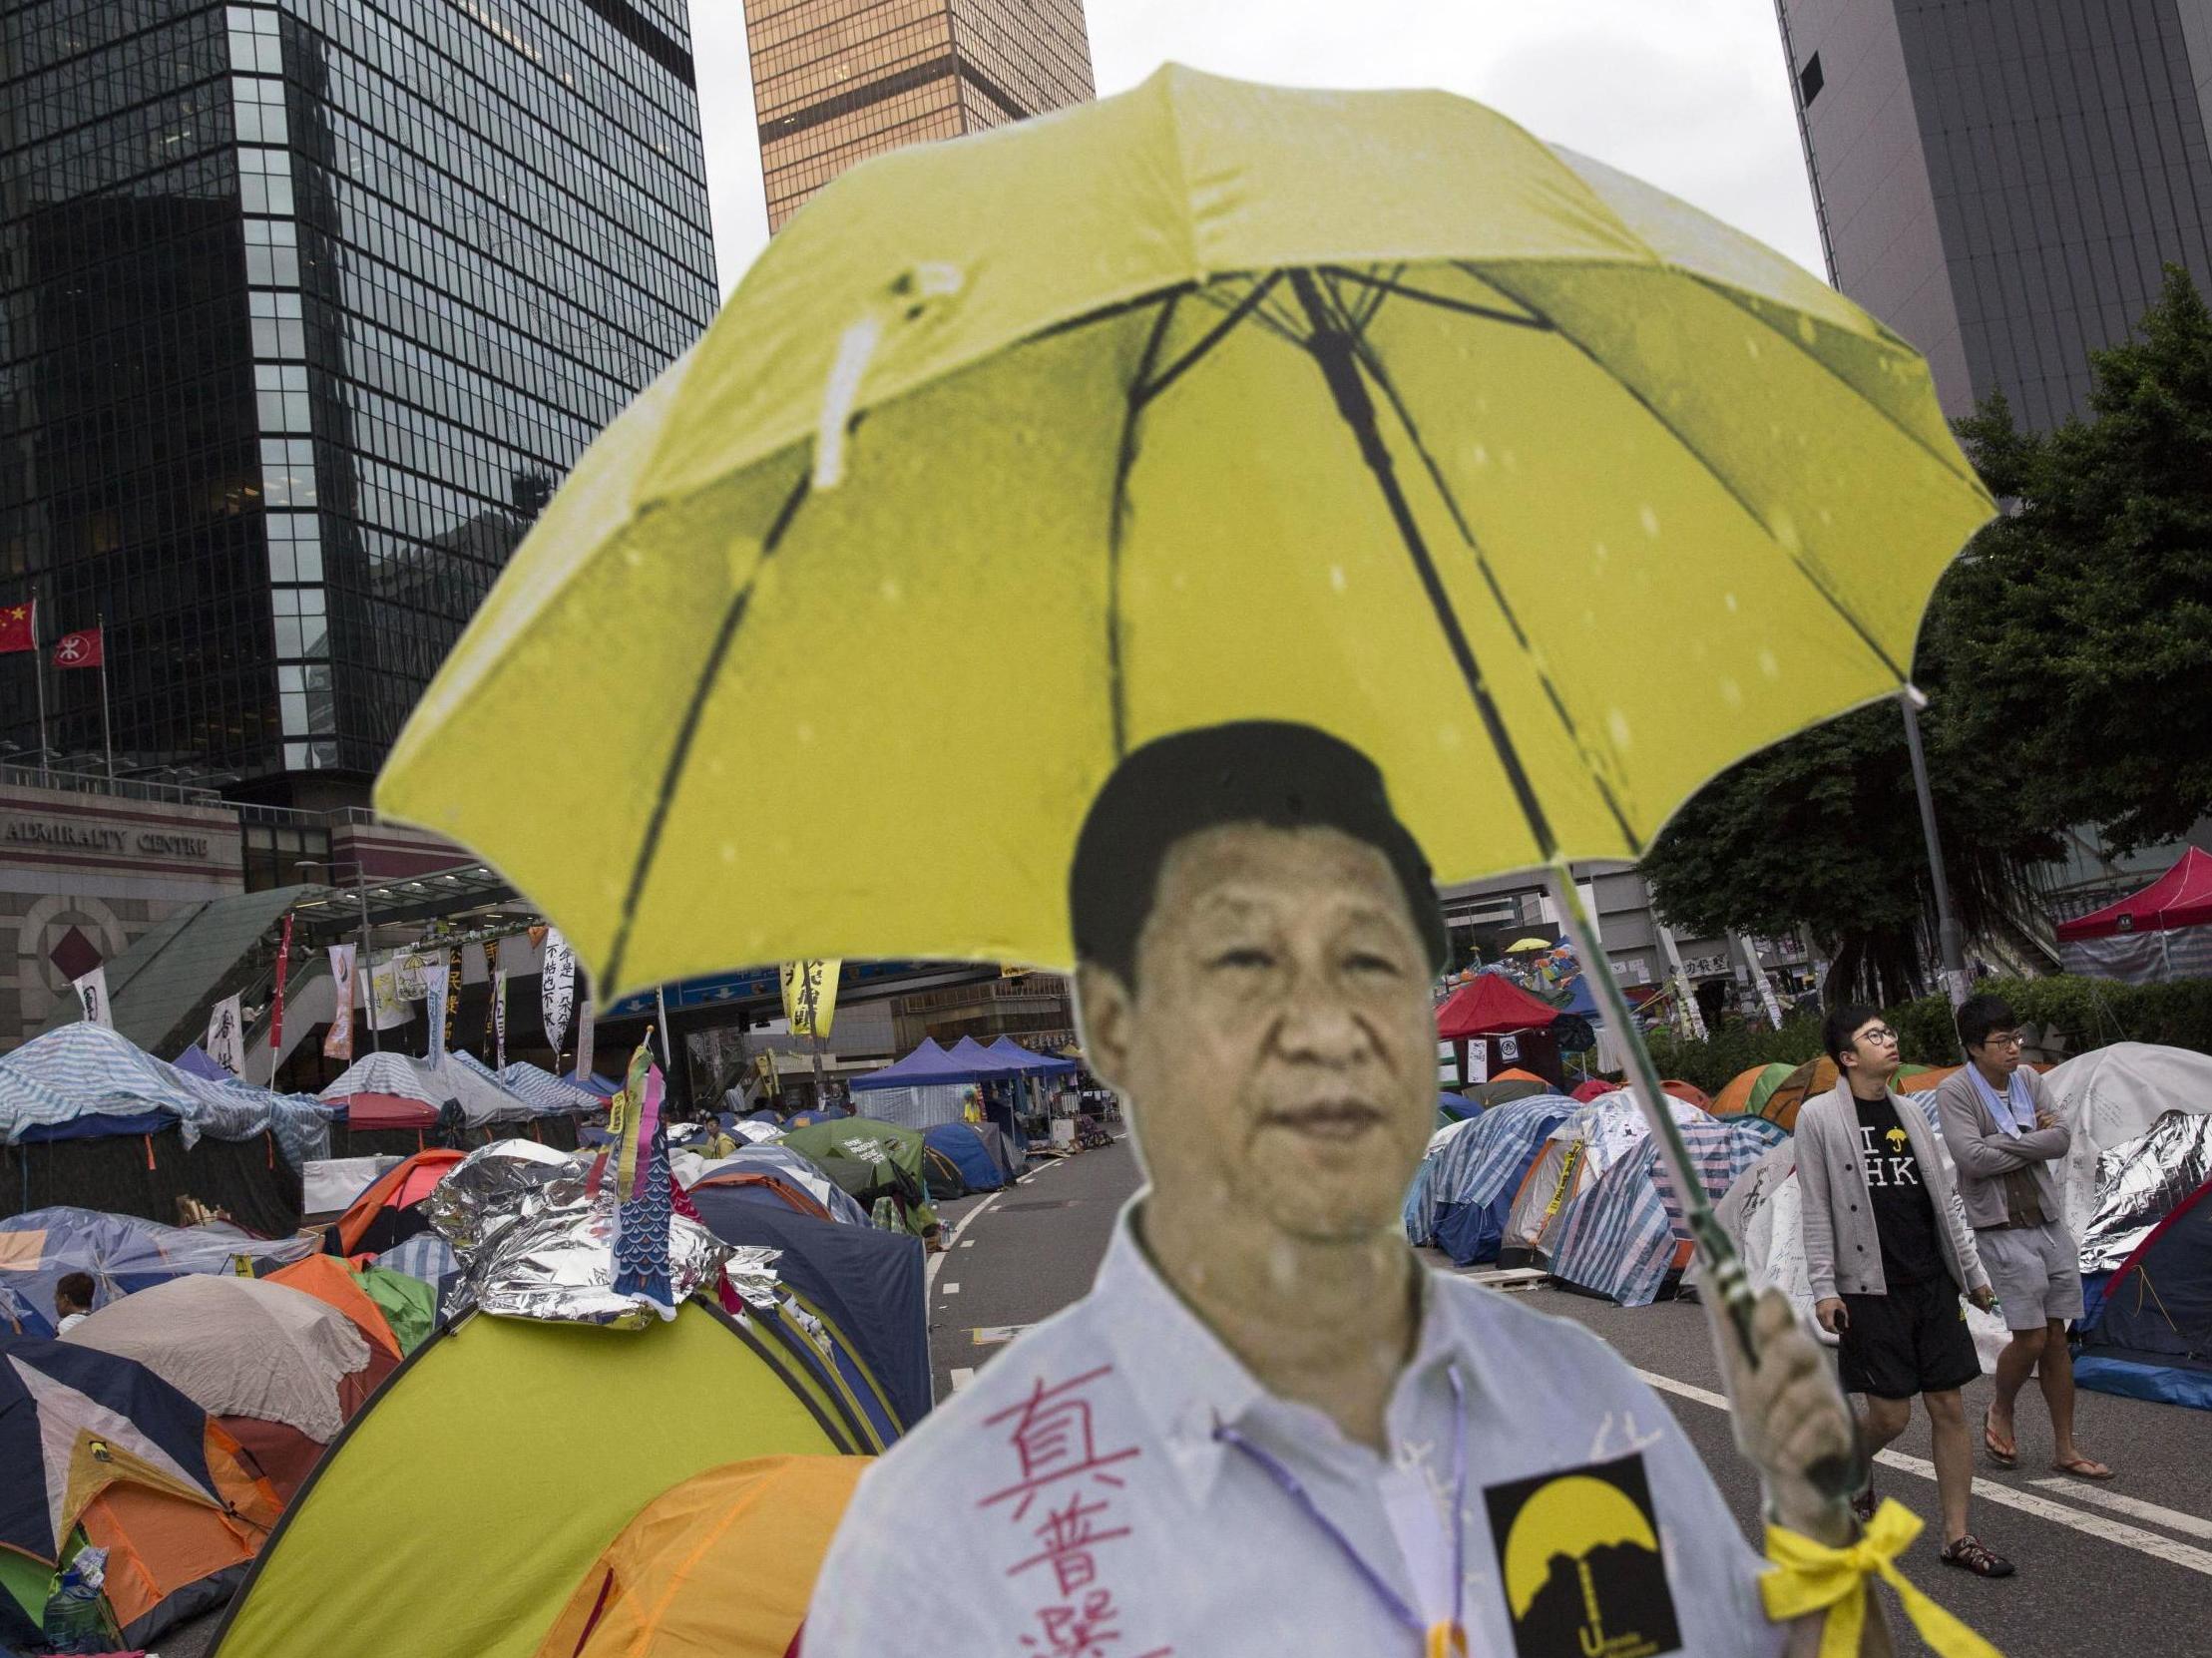 Hong Kong protesters used a cardboard cut-out of Chinese president Xi Jinping holding a yellow umbrella, the symbol of their movement – the real Xi is hoping for blue skies on Tuesday